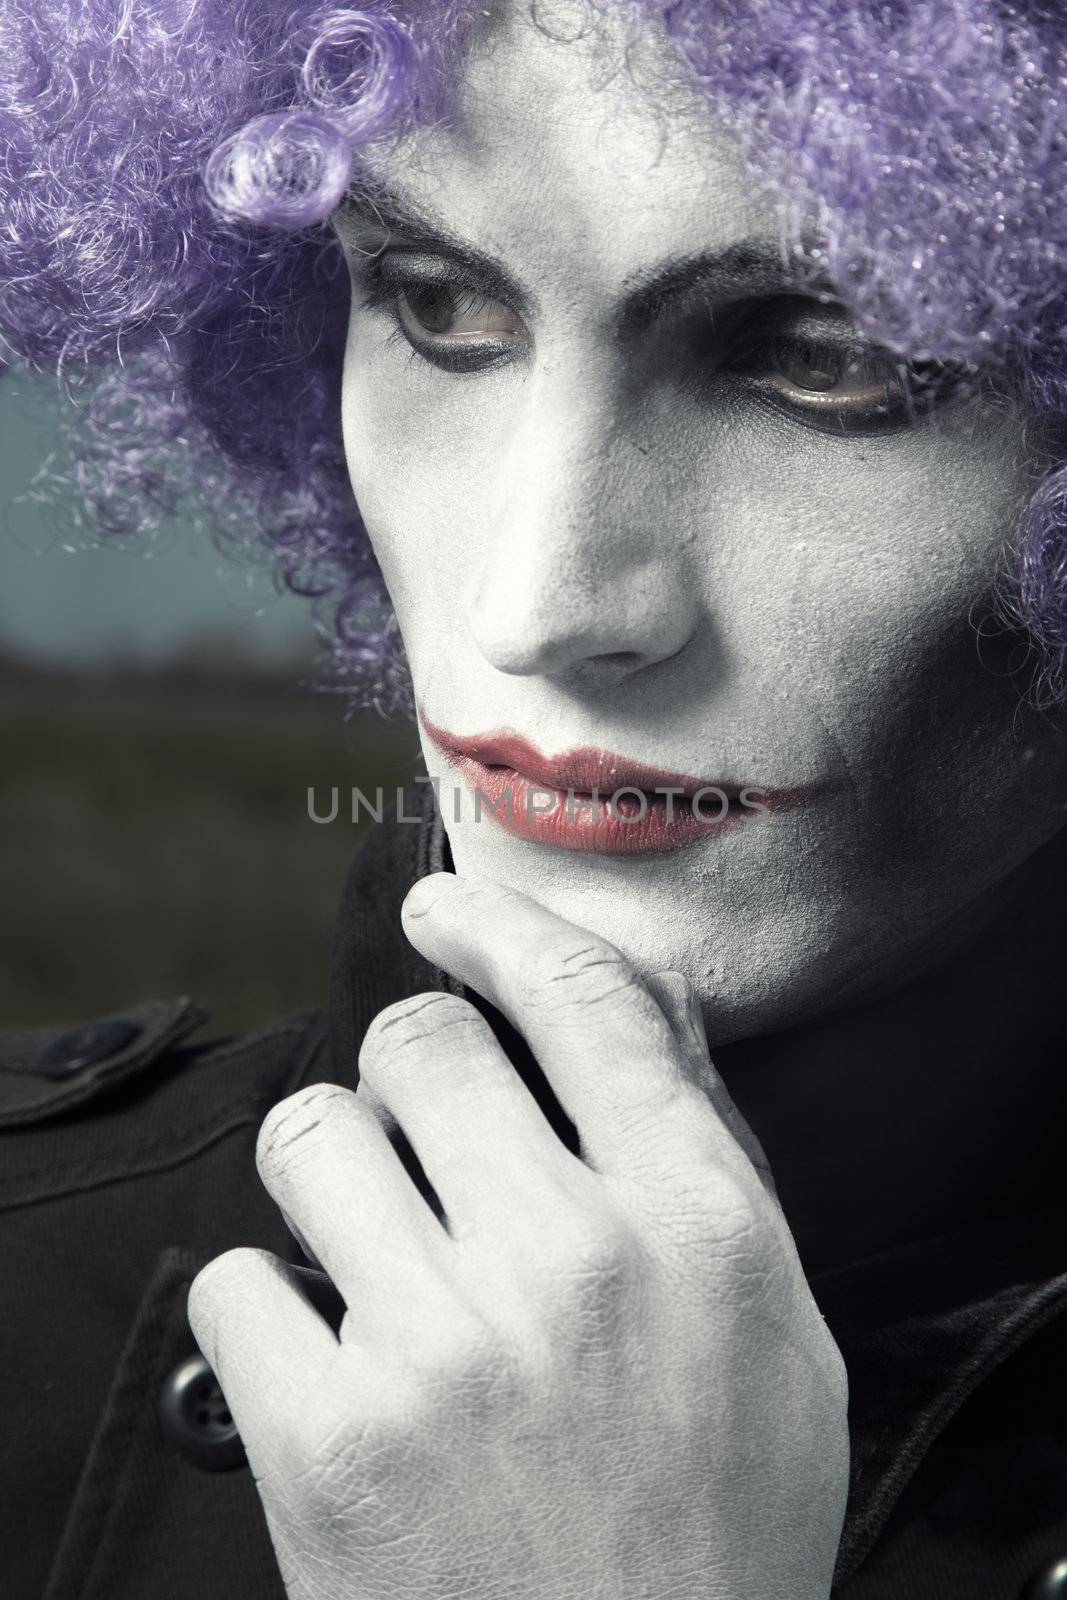 Single sad clown with theatrical makeup and wig. Vertical photo with dramatic colors and toning